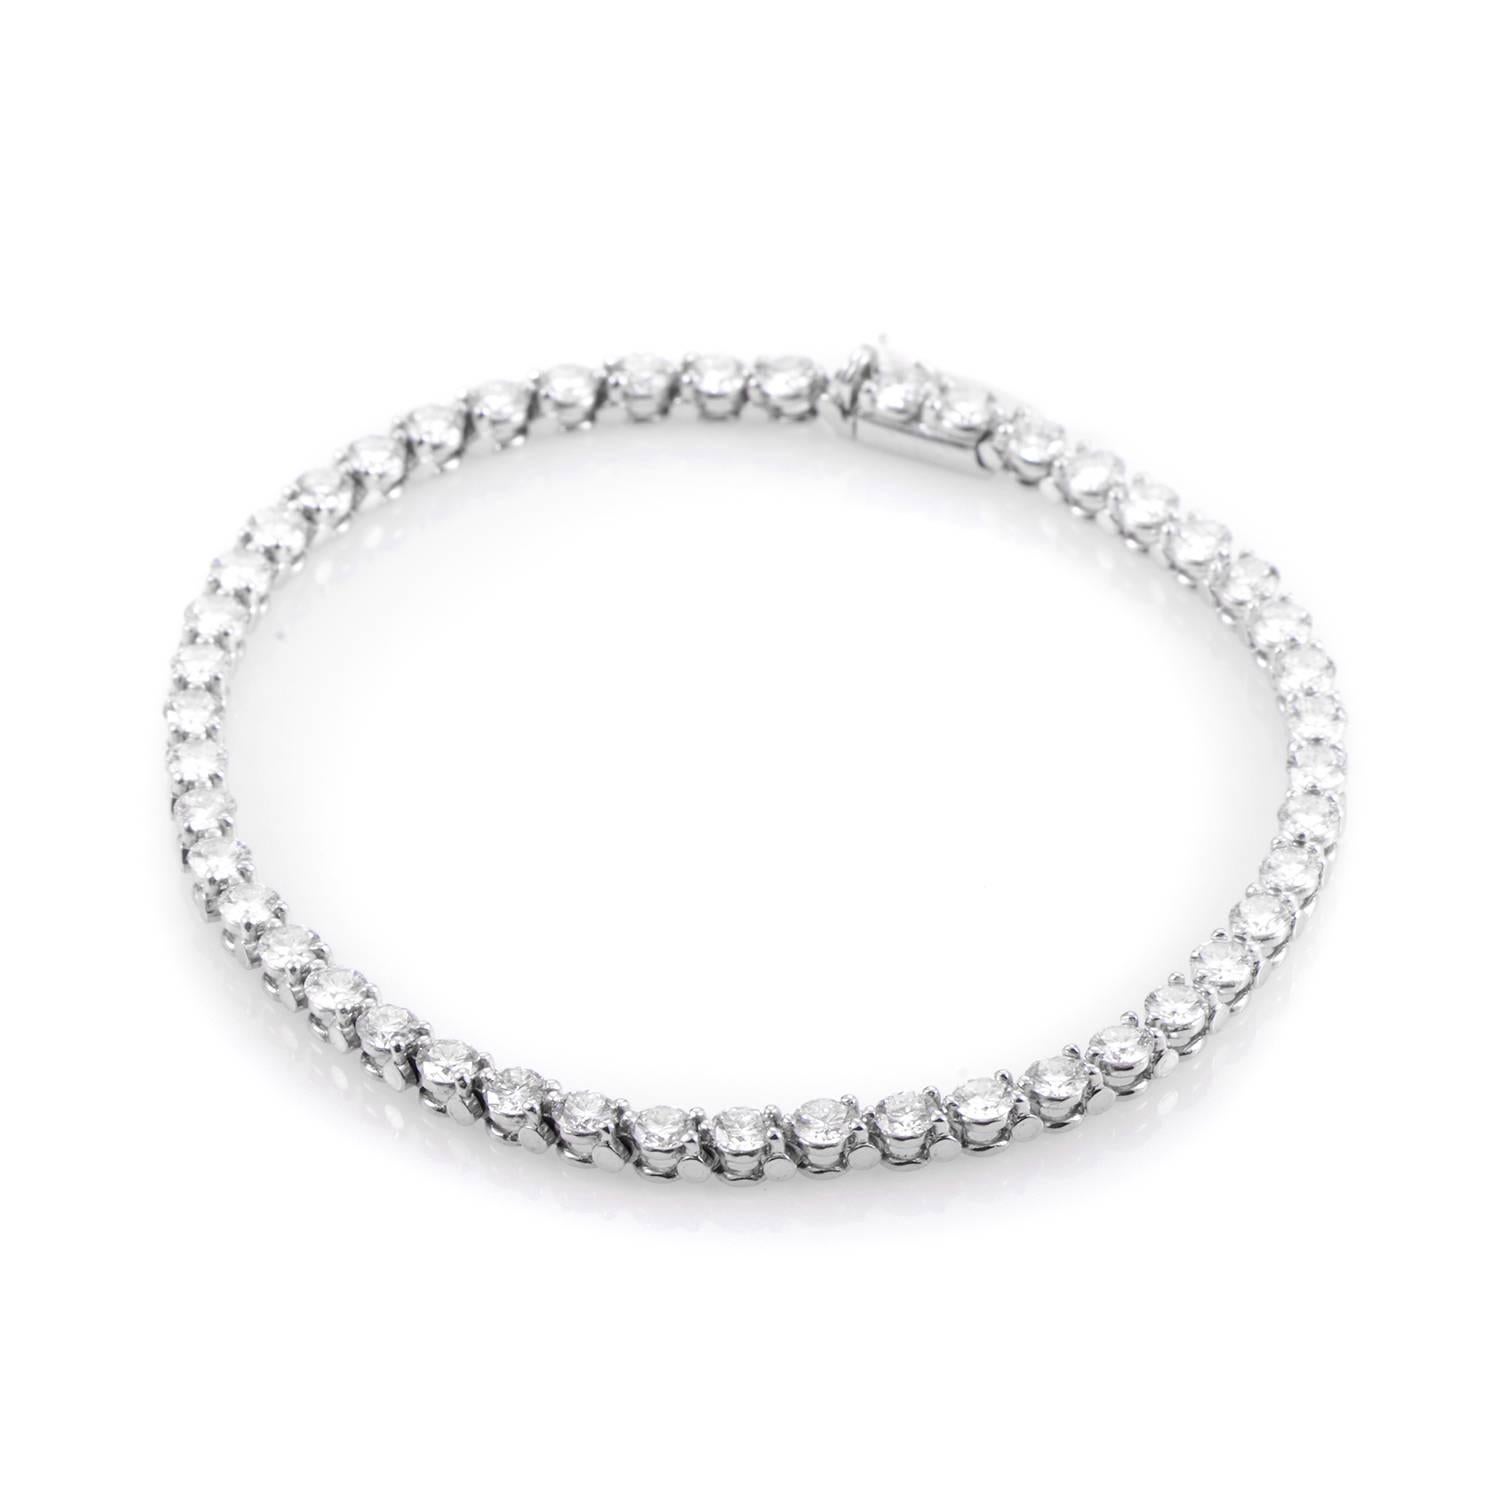 With elegant simplicity in design and lavish prestige in selection of materials, this magnificent bracelet from Cartier exudes a luxurious allure through the gleam of platinum and sparkle of diamonds weighing in total 4.80 carats.
Included Items: